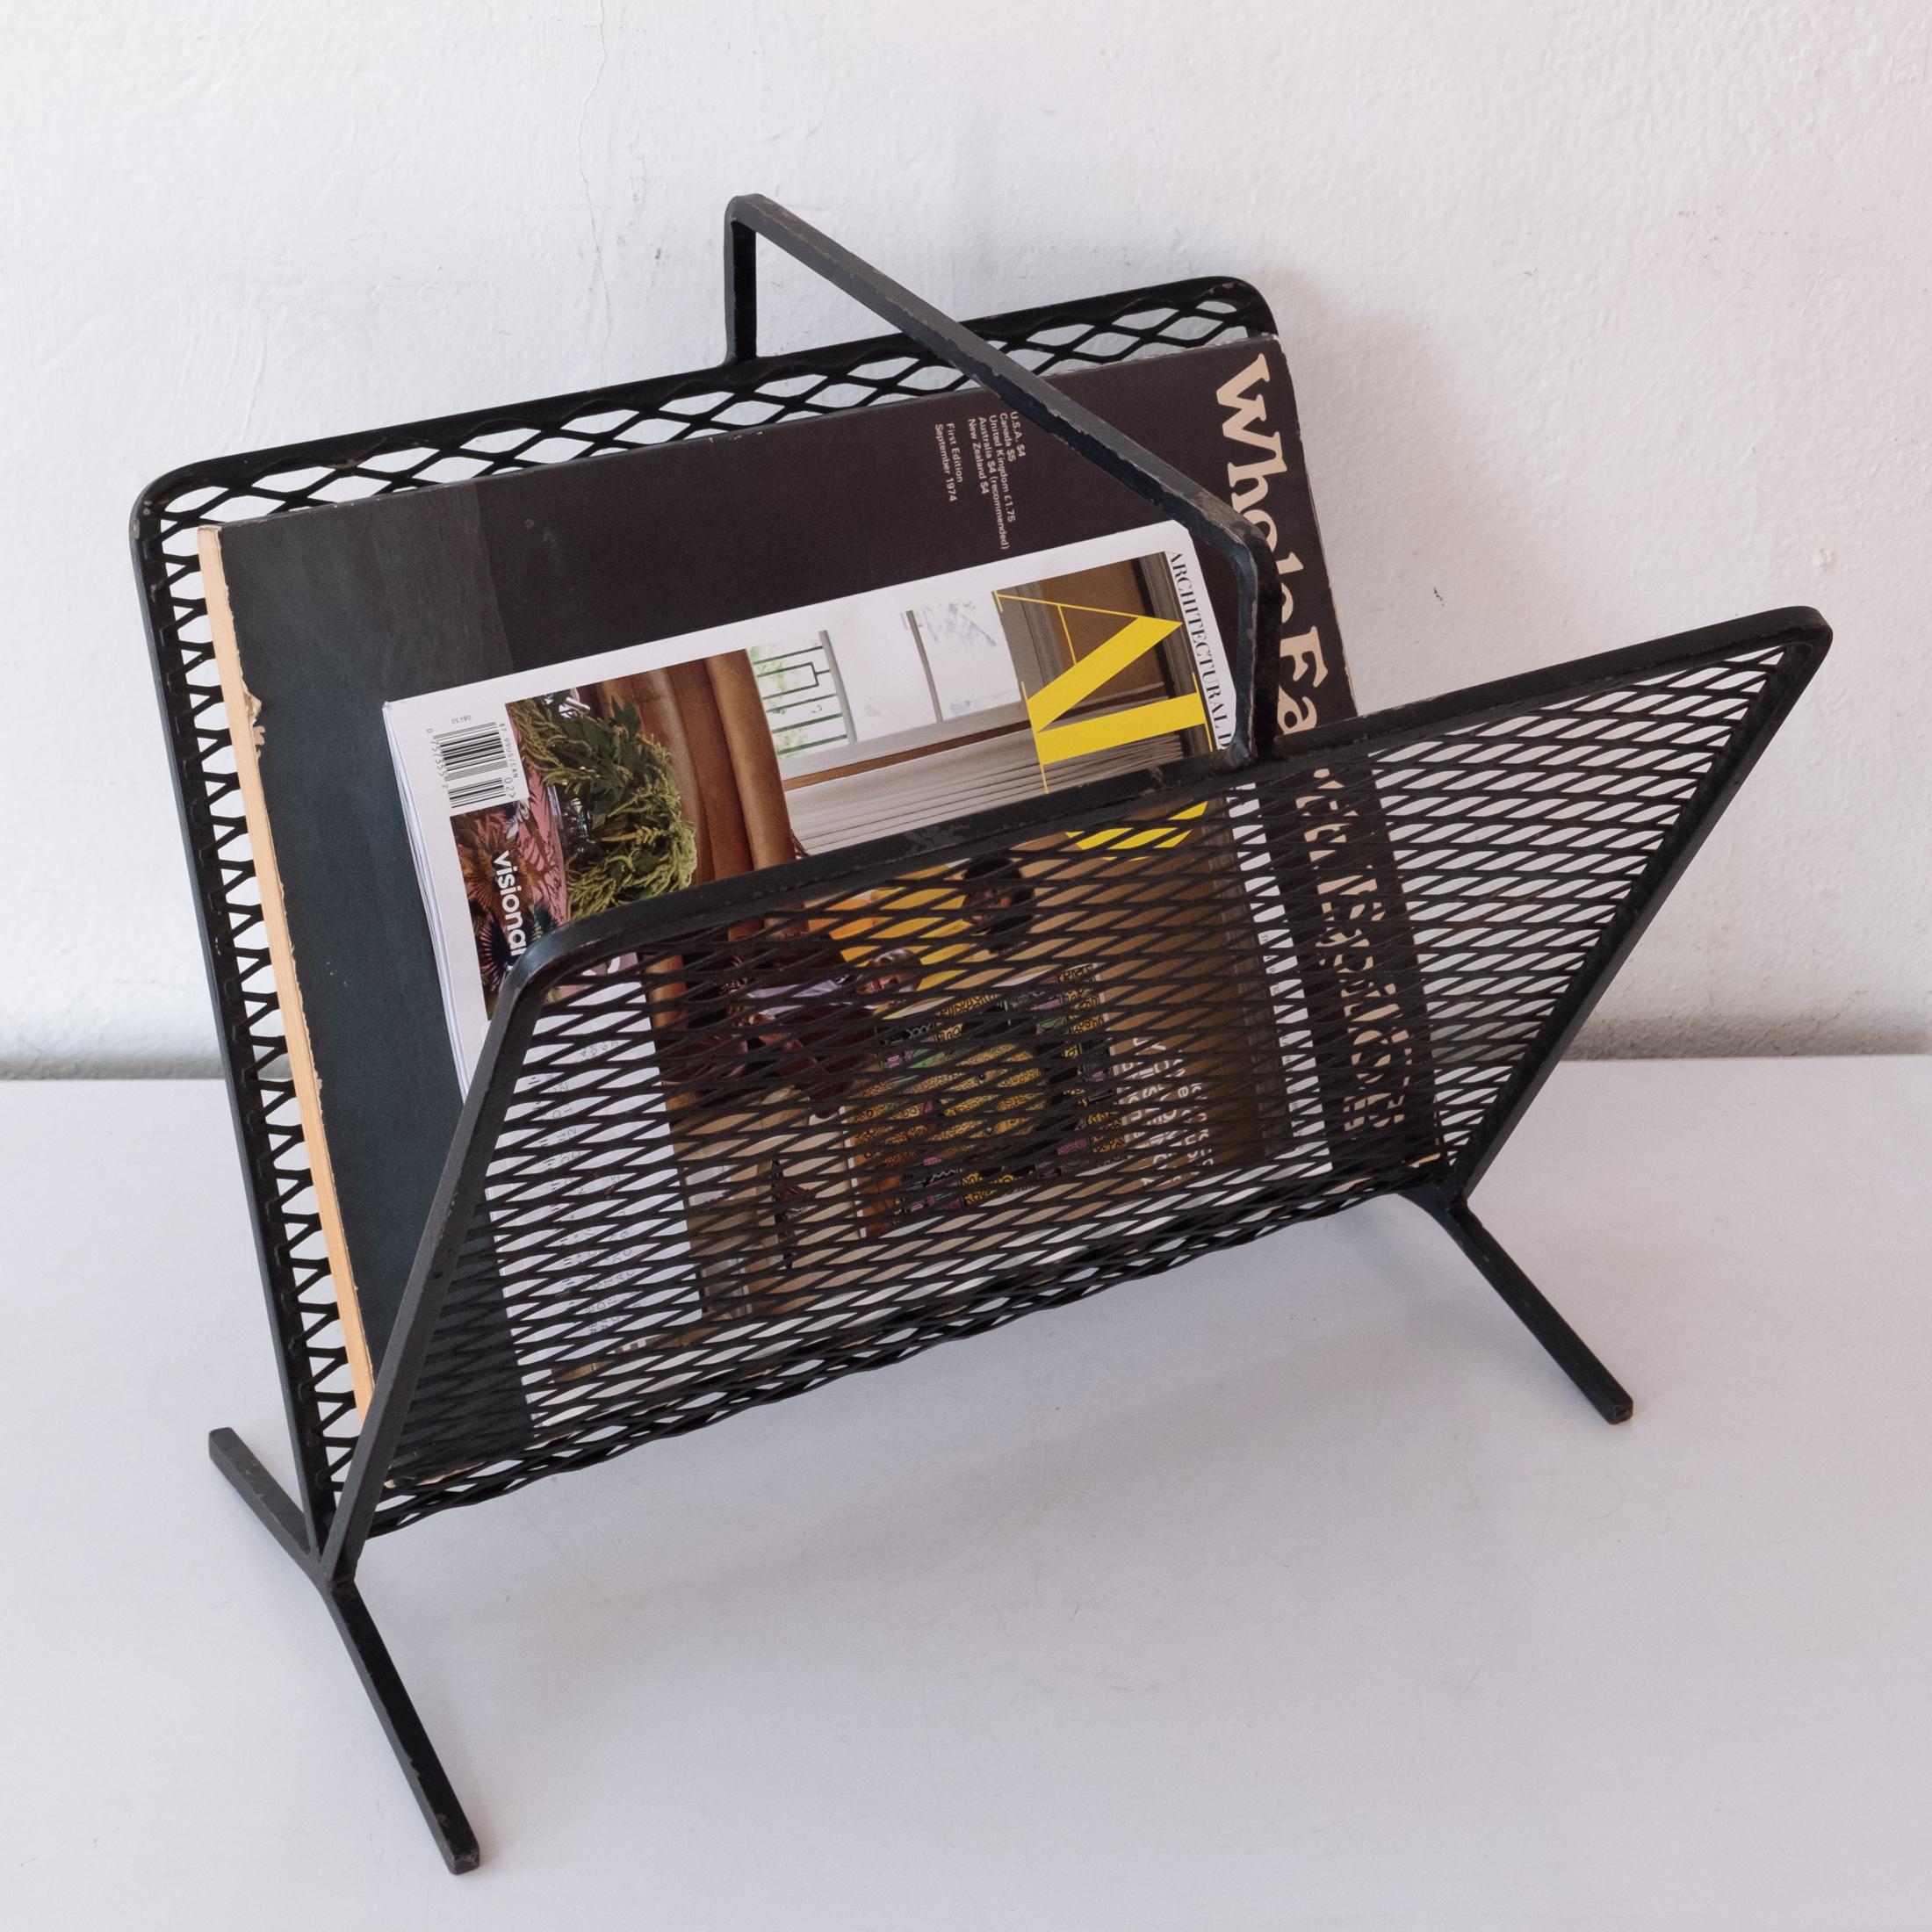 Iron and expanded metal magazine holder. Well done with a minimalist California design aesthetic. Original finish from the 1950s.